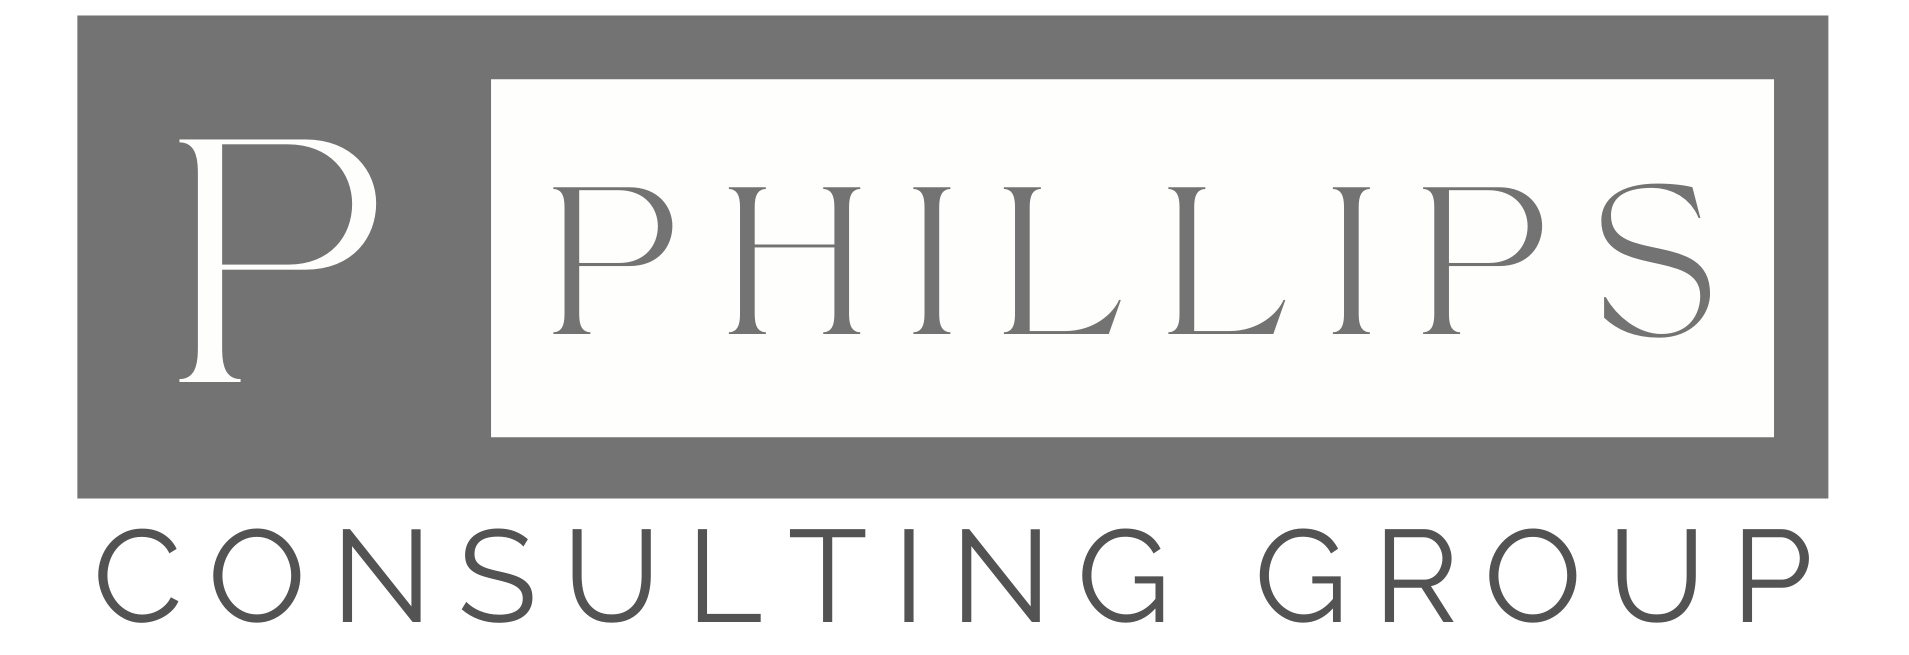 Phillips Consulting Group